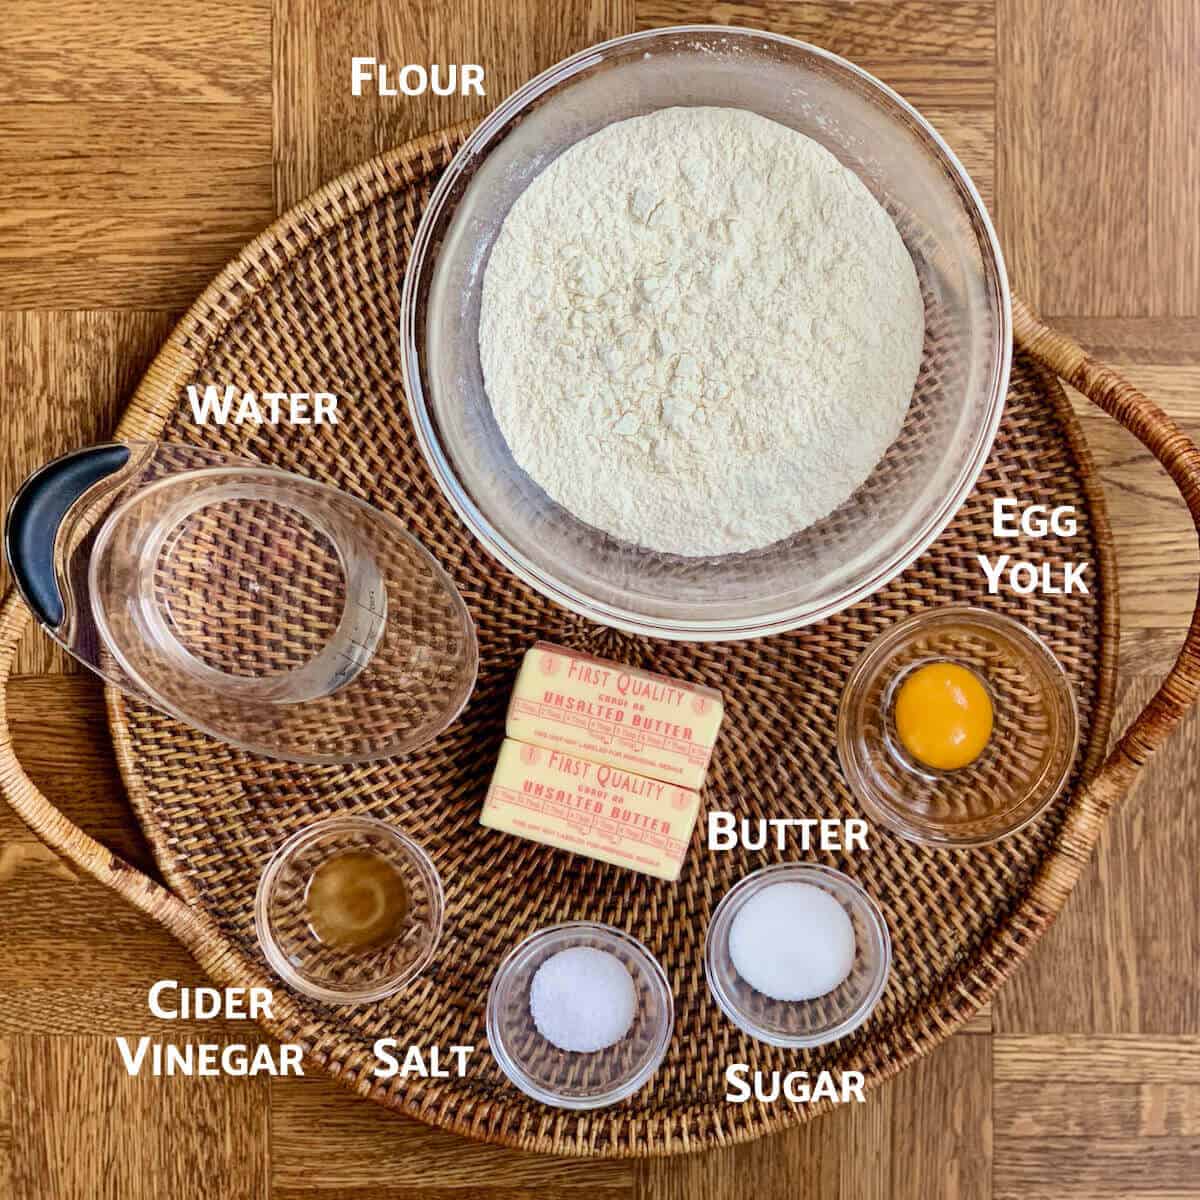 Short crust pastry ingredients portioned into glass bowls on a woven tray from overhead.